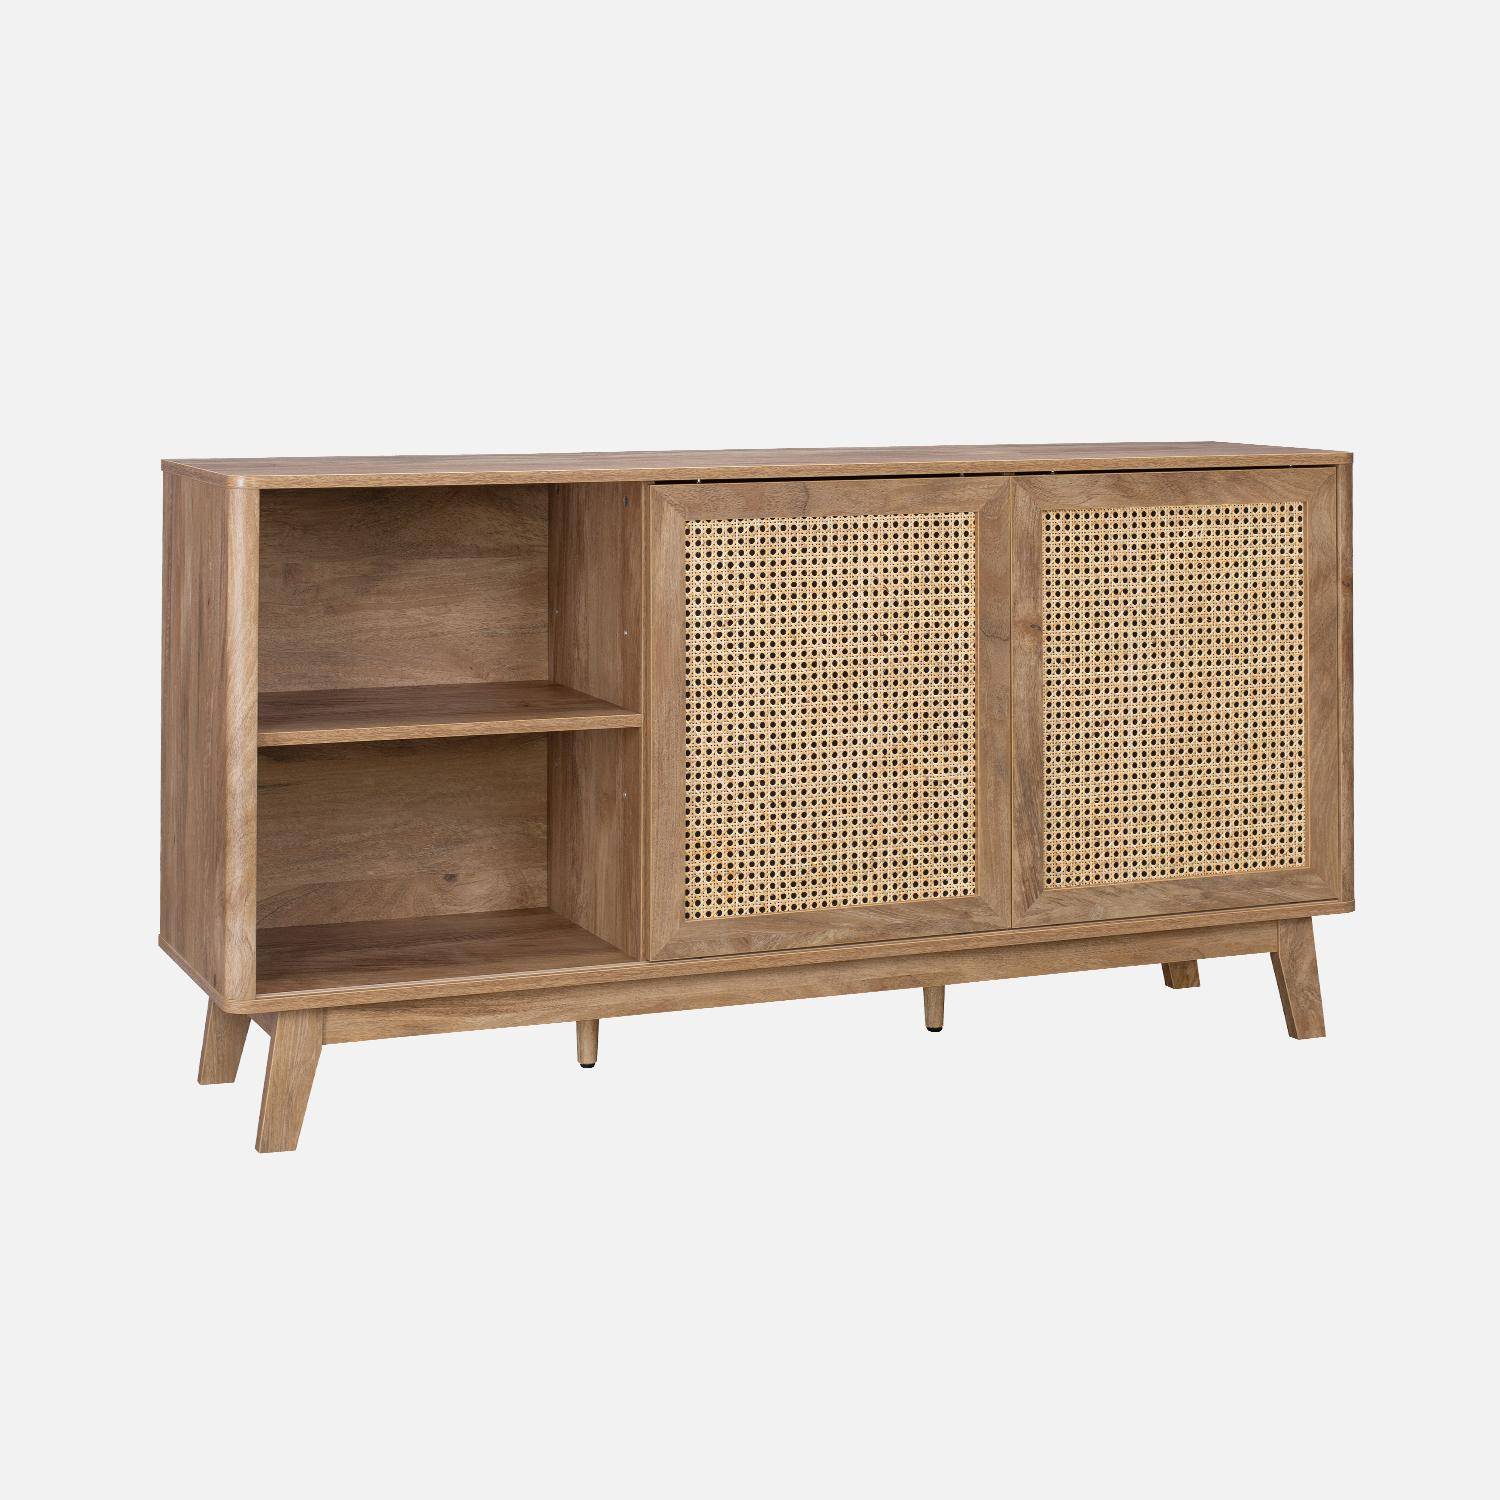 150cm sideboard with 2 sliding doors and shelves, wood effect and cane detail  Photo3